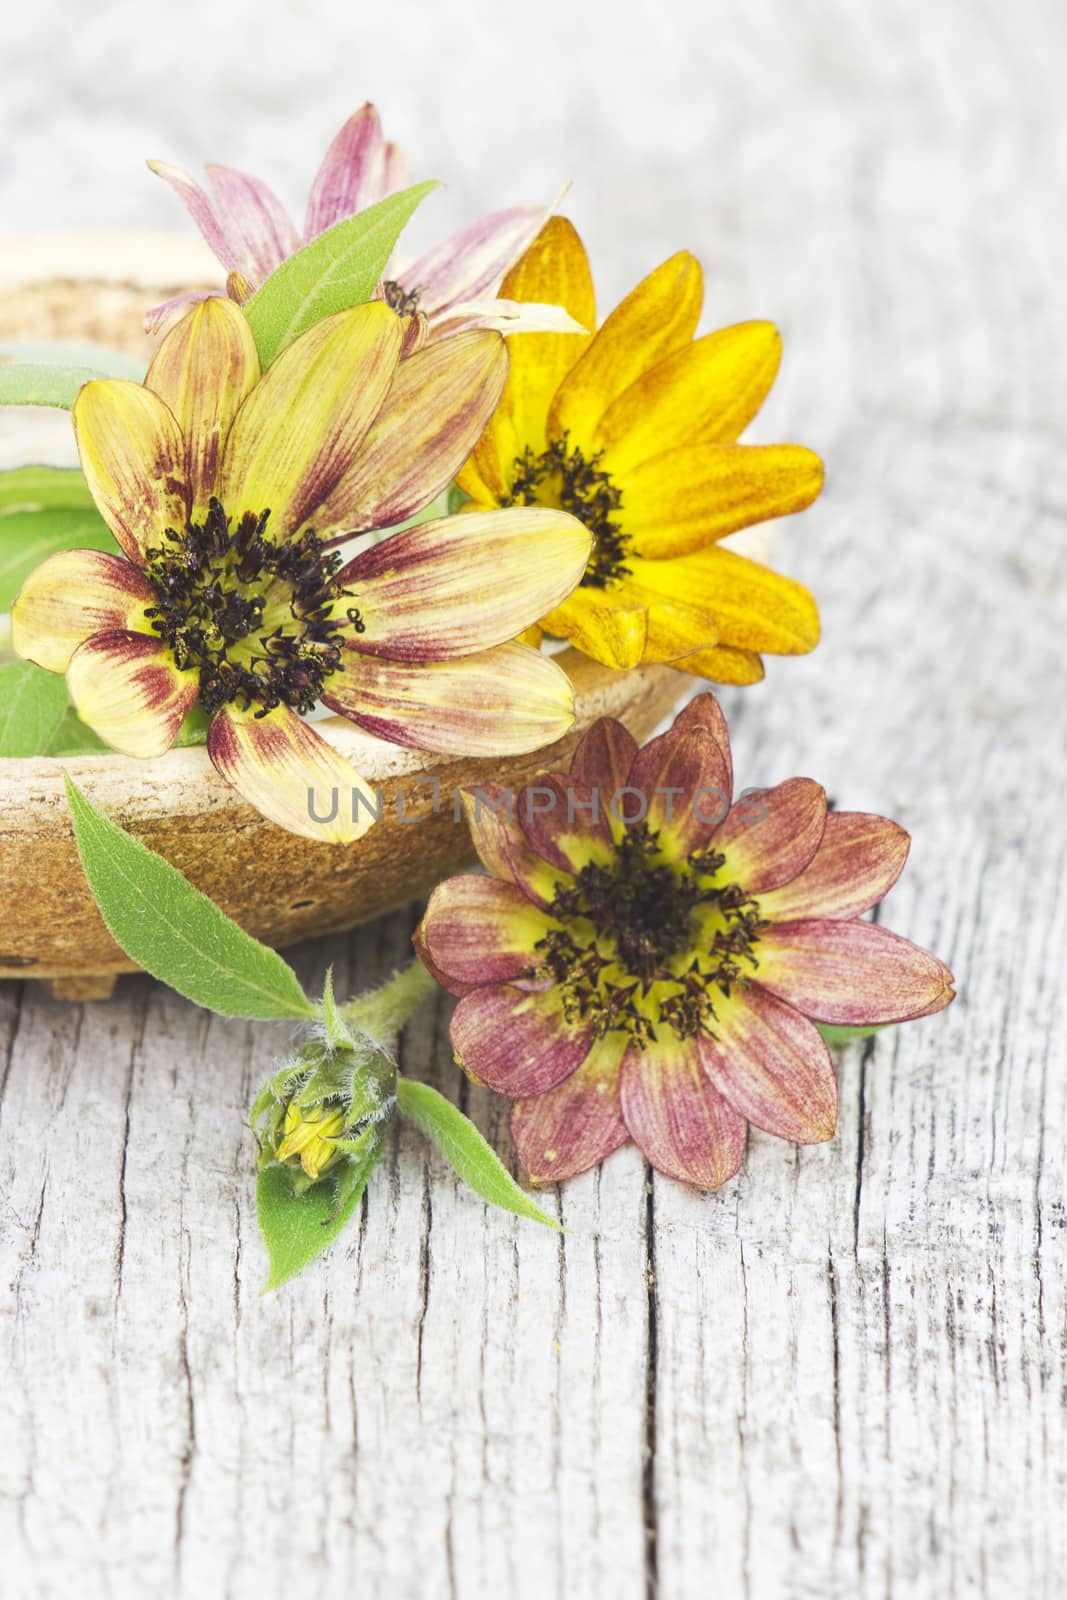 sunflowers on old wooden background (Helianthus) by miradrozdowski